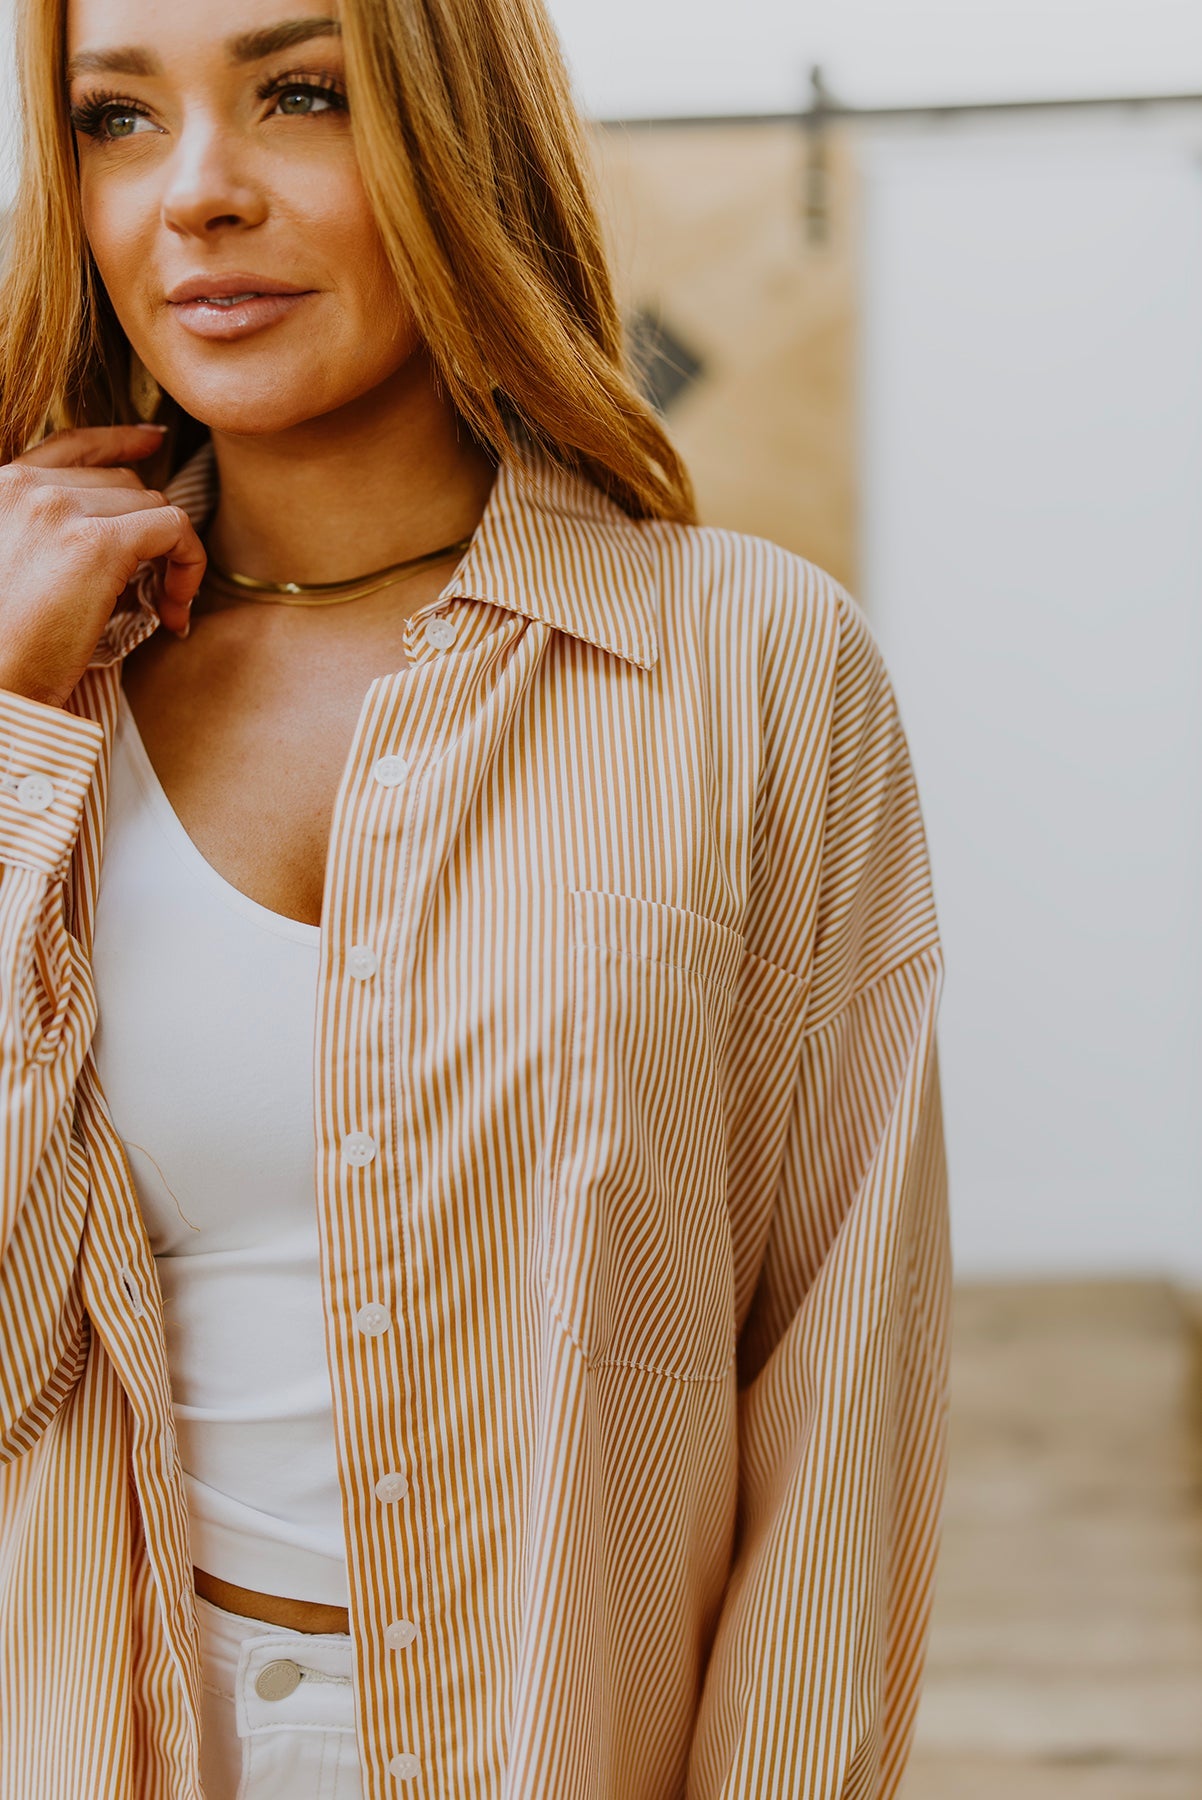 Easy On The Eyes Striped Button Up - Zenana